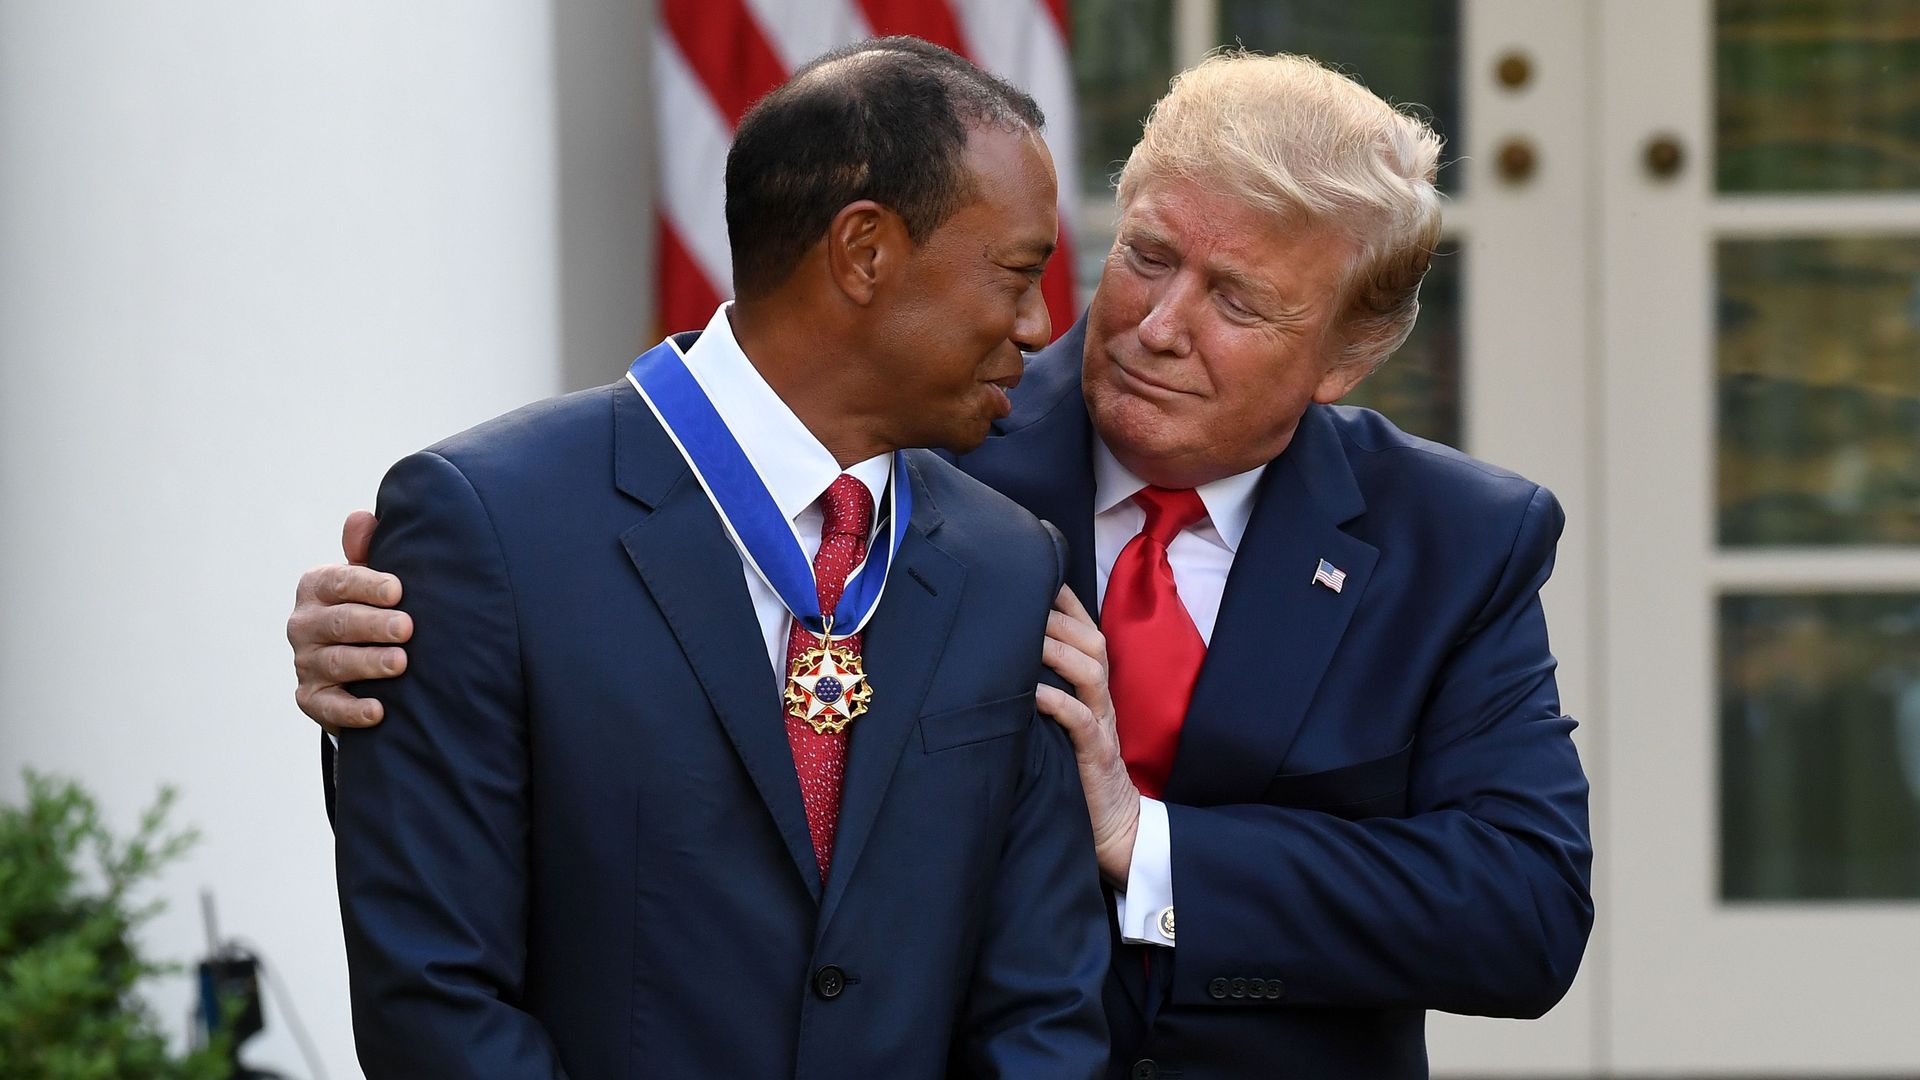 President Donald Trump presents US golfer Tiger Woods with the Presidential Medal of Freedom during a ceremony in the Rose Garden of the White House in Washington, DC, Monday.